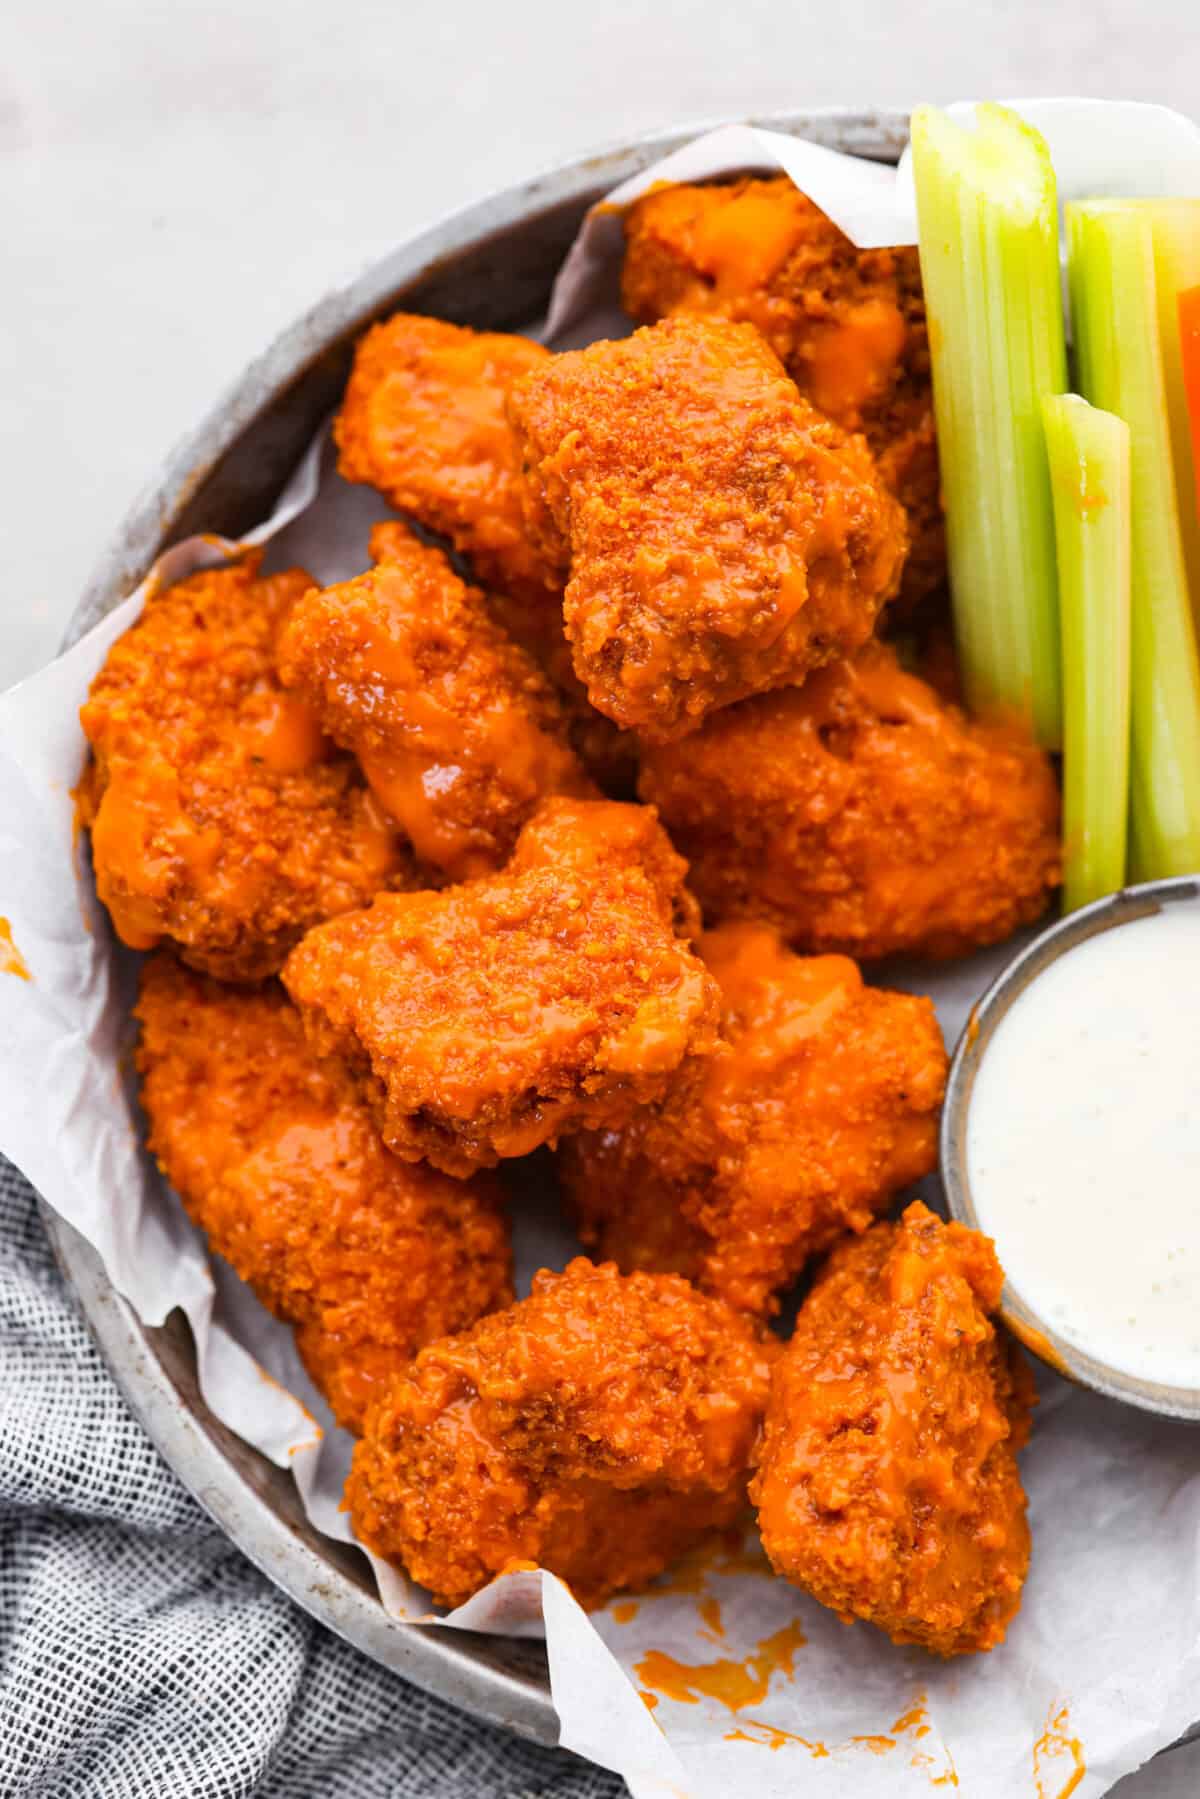 Boneless wings served with celery sticks and ranch.